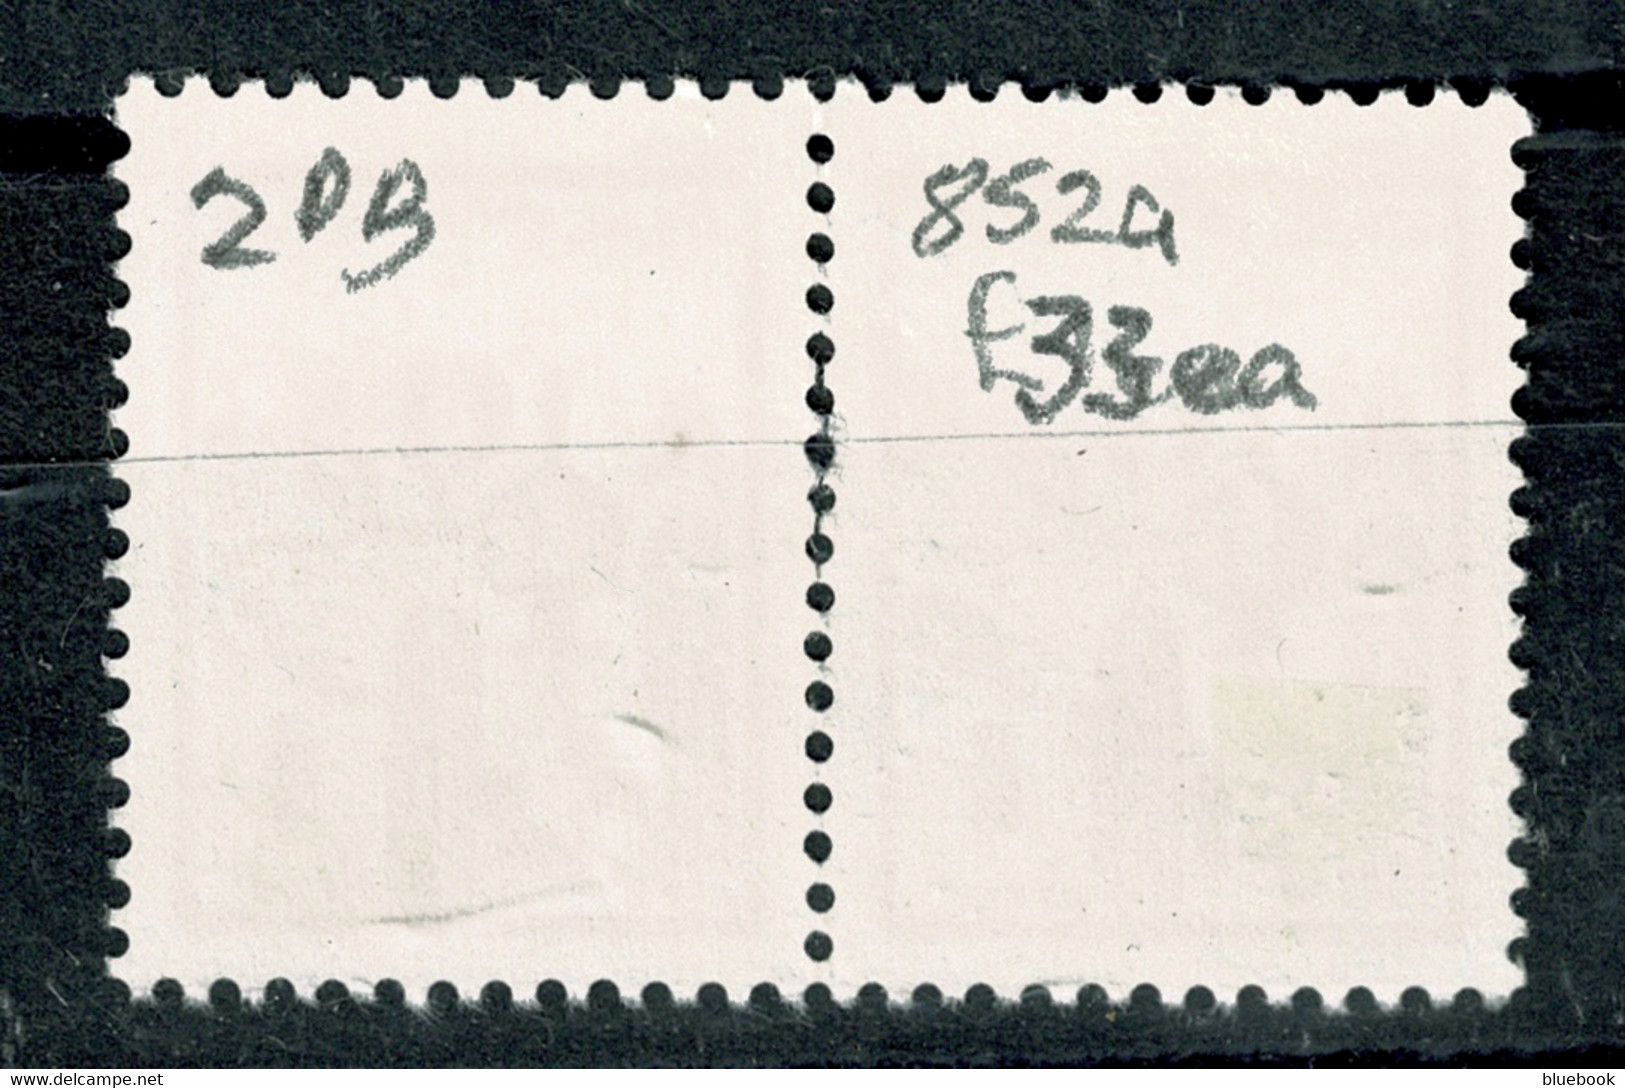 Ref 1577 - Israel 1982 500s Stamps Pair With Phosphor Bands SG 852a - Gebraucht (mit Tabs)